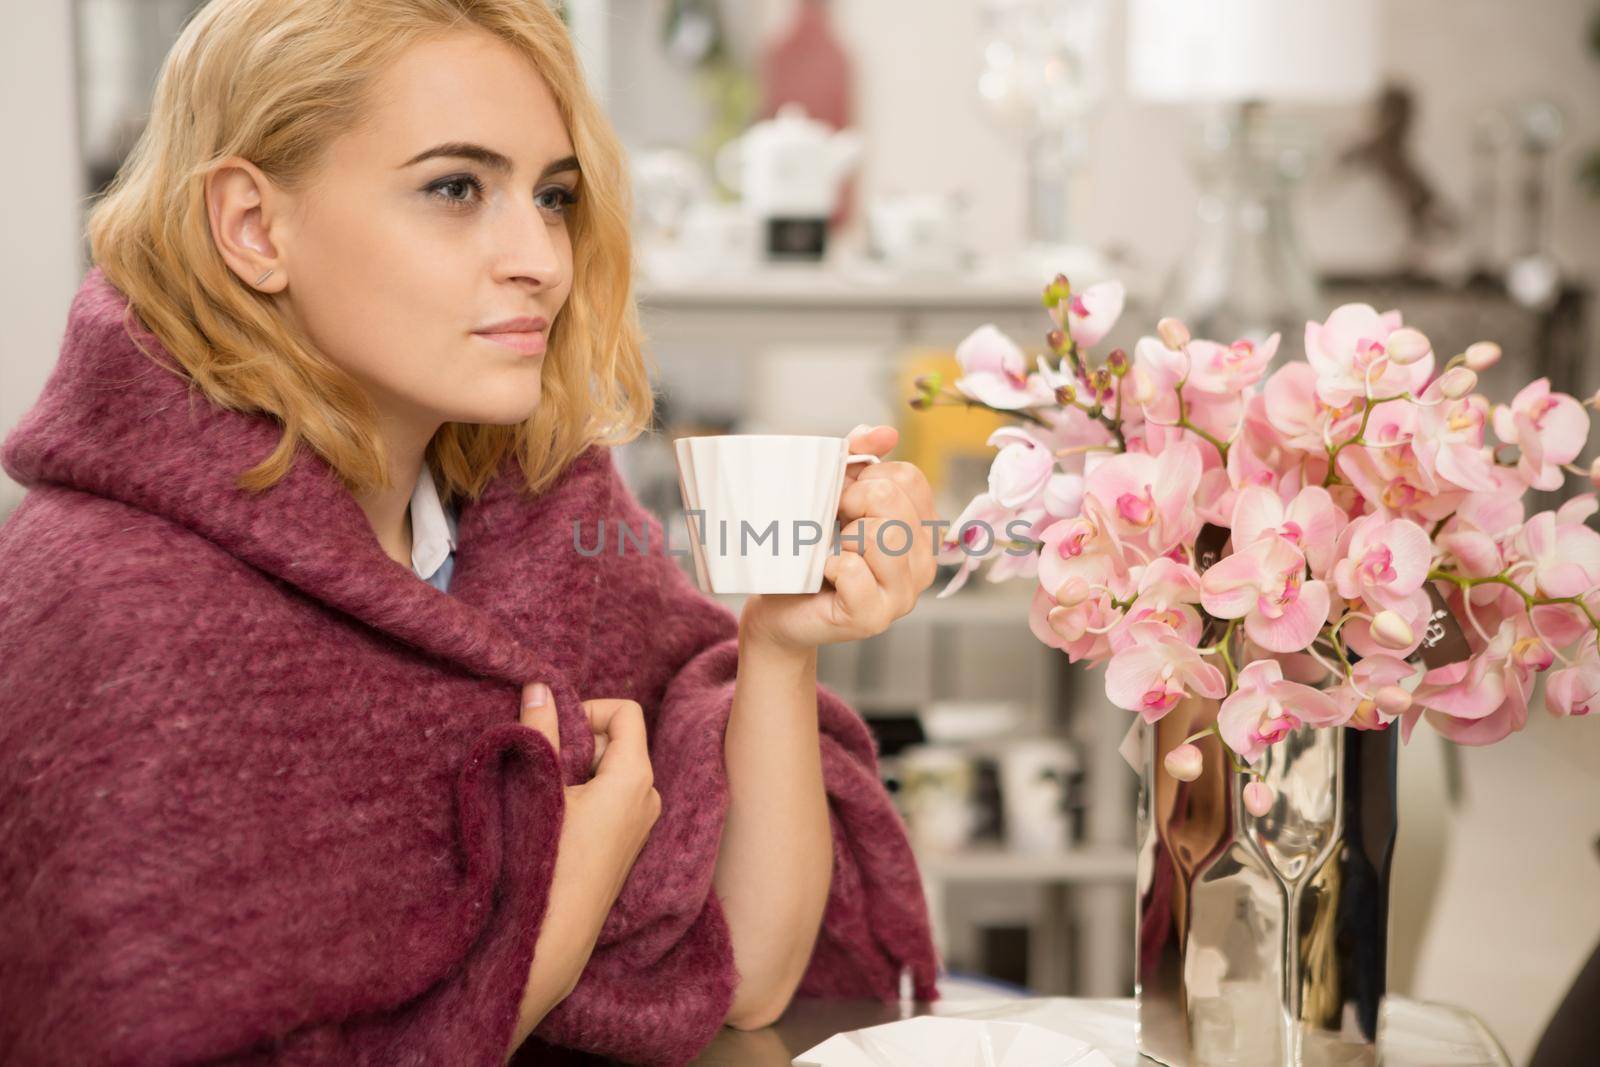 Attractive blonde young woman enjoying cup of tea or coffee sitting wrapped in a woolen warm blanket relaxing at home on a weekend copyspace lifestyle relaxation harmony femininity beauty leisure